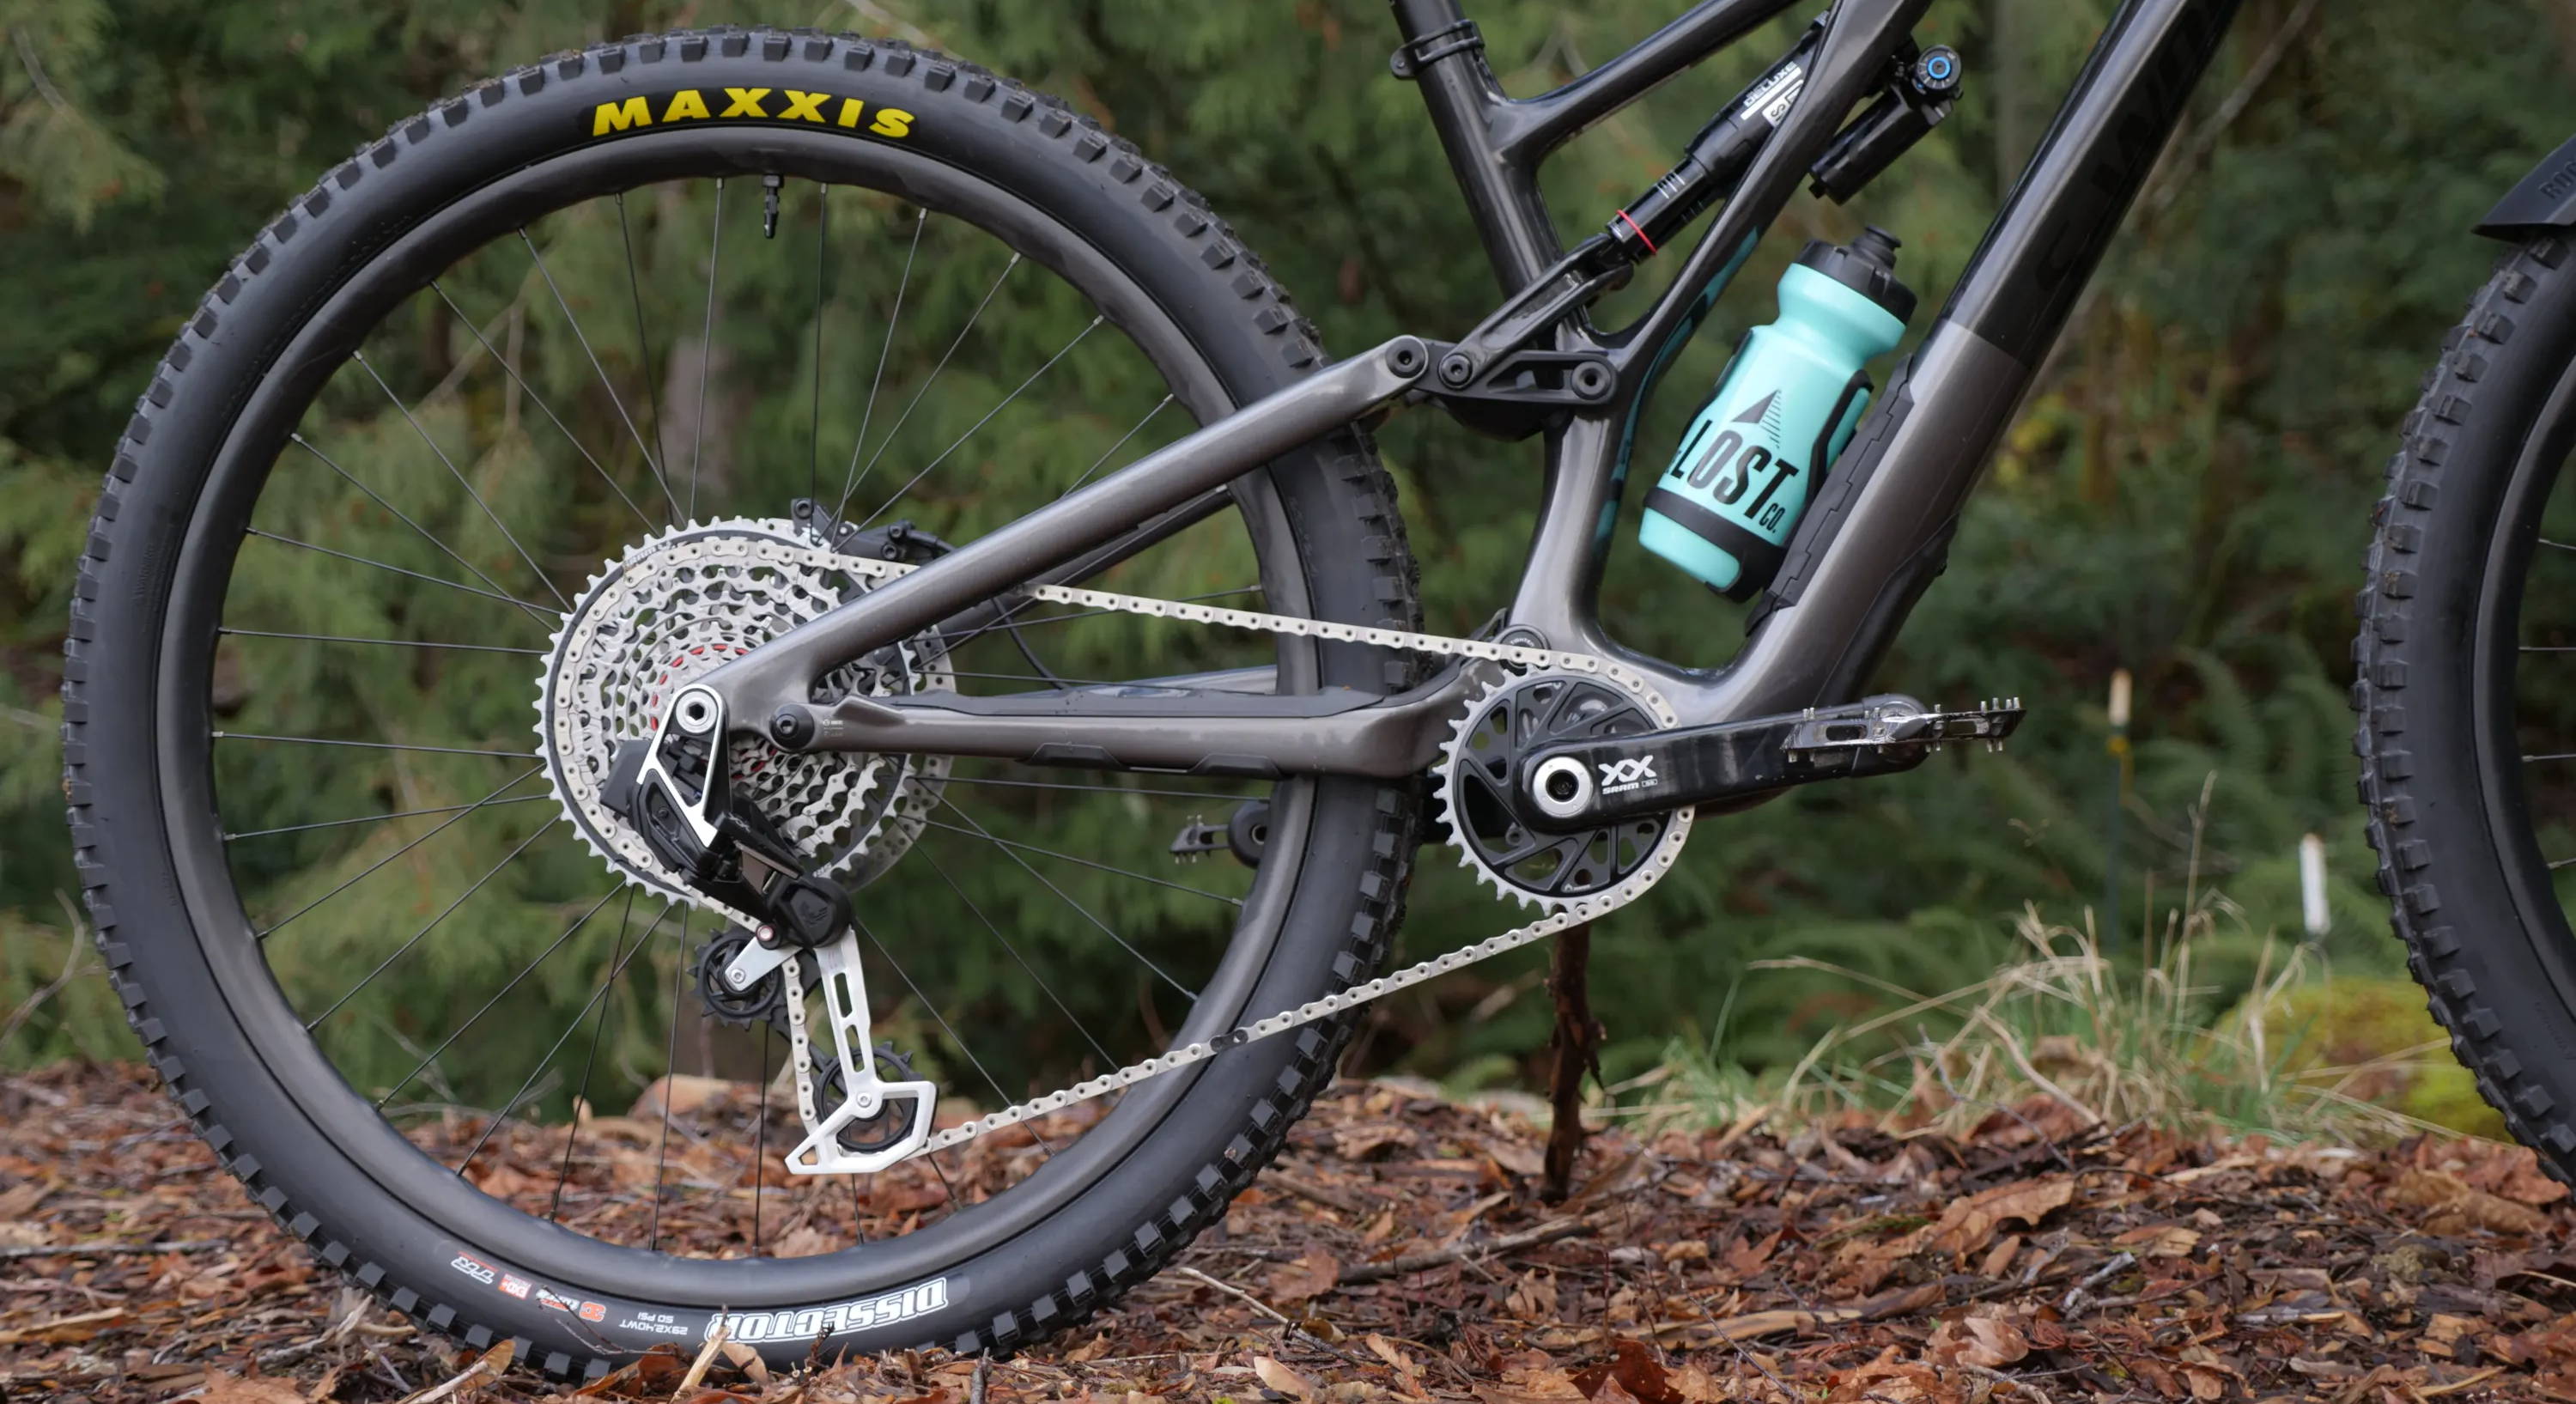 a sram xx eagle axs transmission groupset on a specialized stumpjumper evo